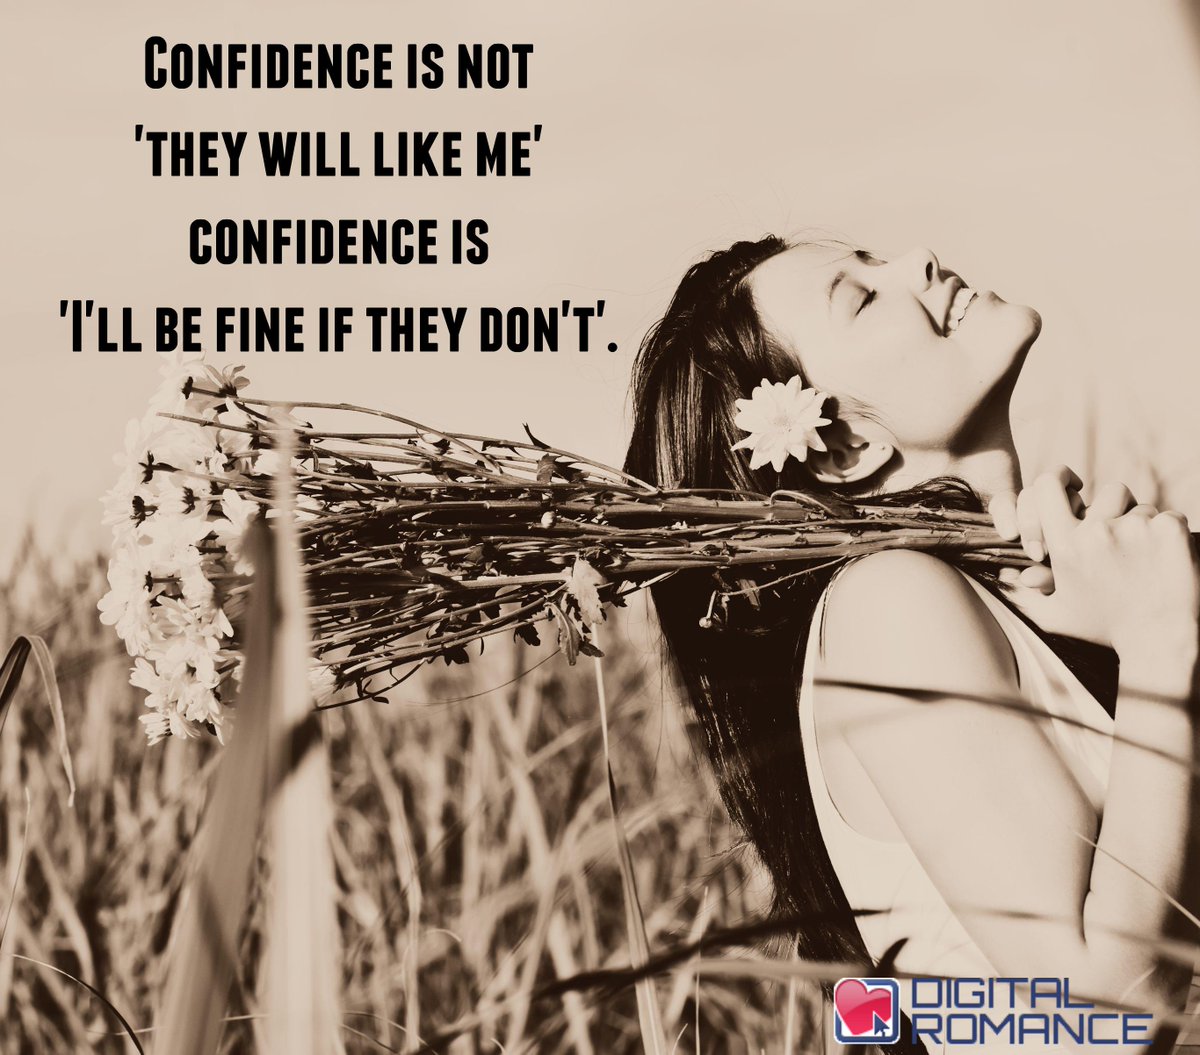 Digital Romance Inc on Twitter: "Confidence is not 'They will like me'  confidence is 'I'll be fine if they don't'. #confidence #quotes  http://t.co/LDbu9SGJw8"